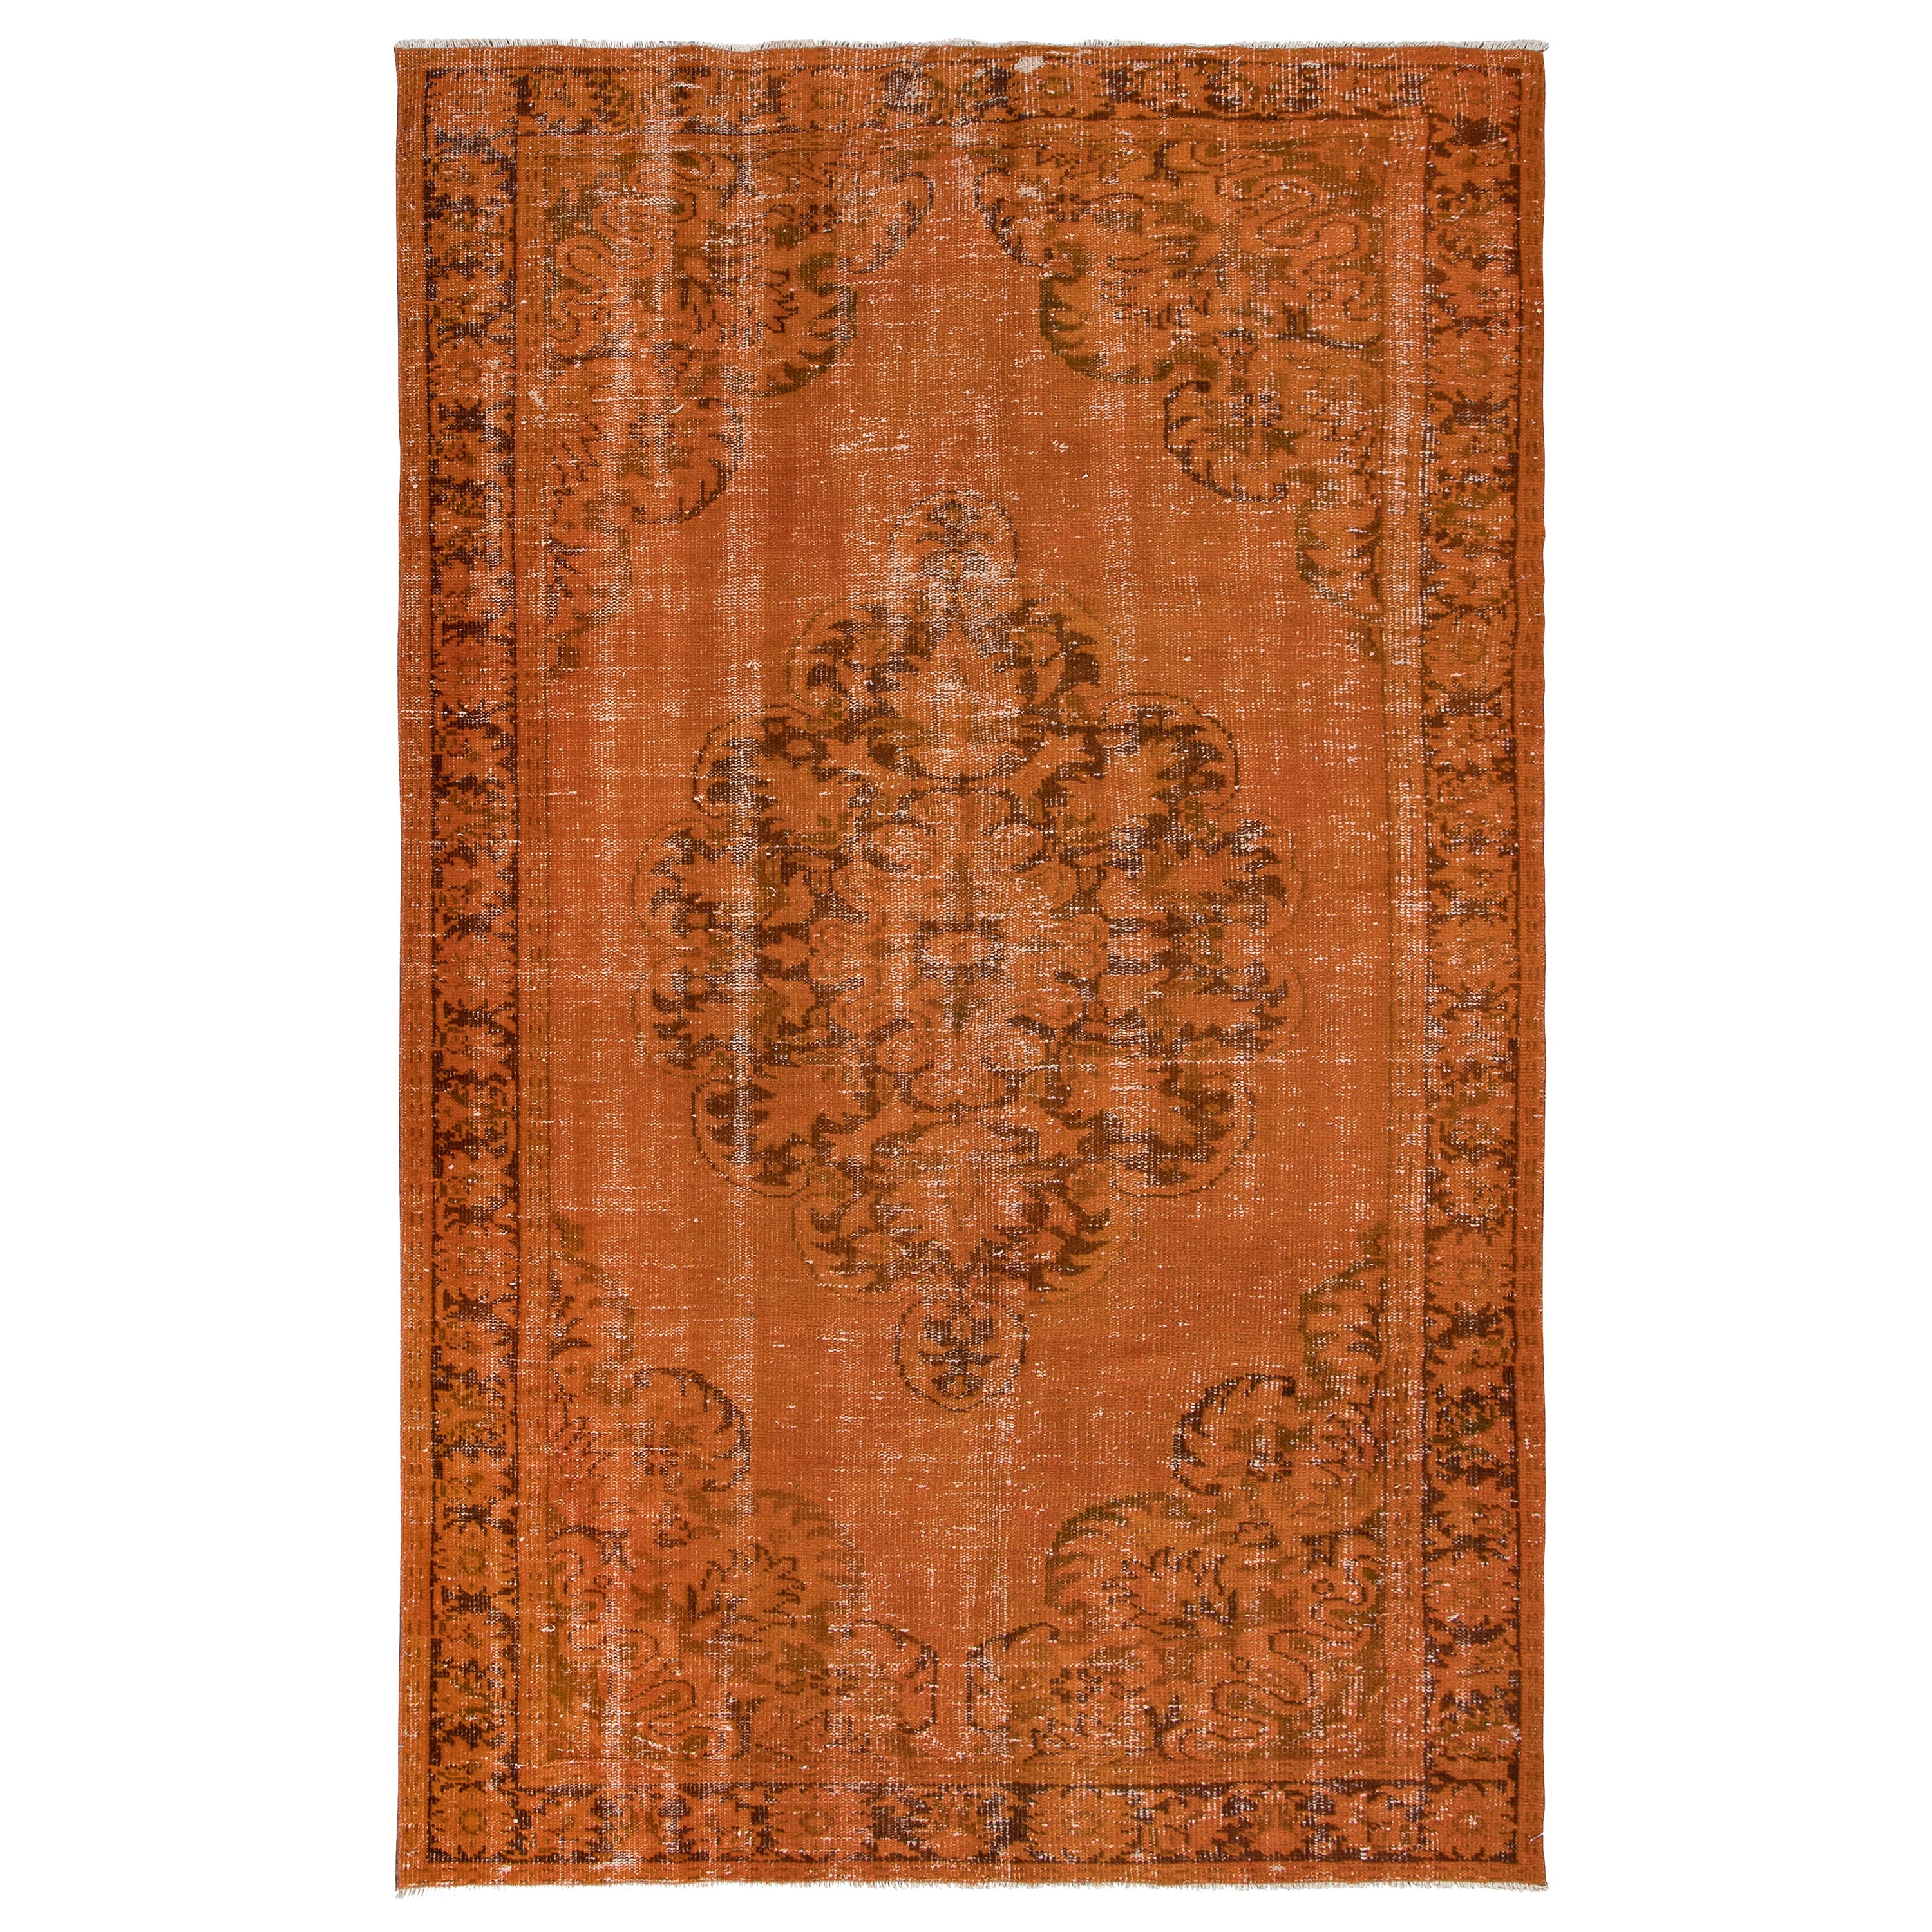 5.8x9.3 Ft Contemporary Living Room Carpet in Orange, Hand-Made Turkish Area Rug